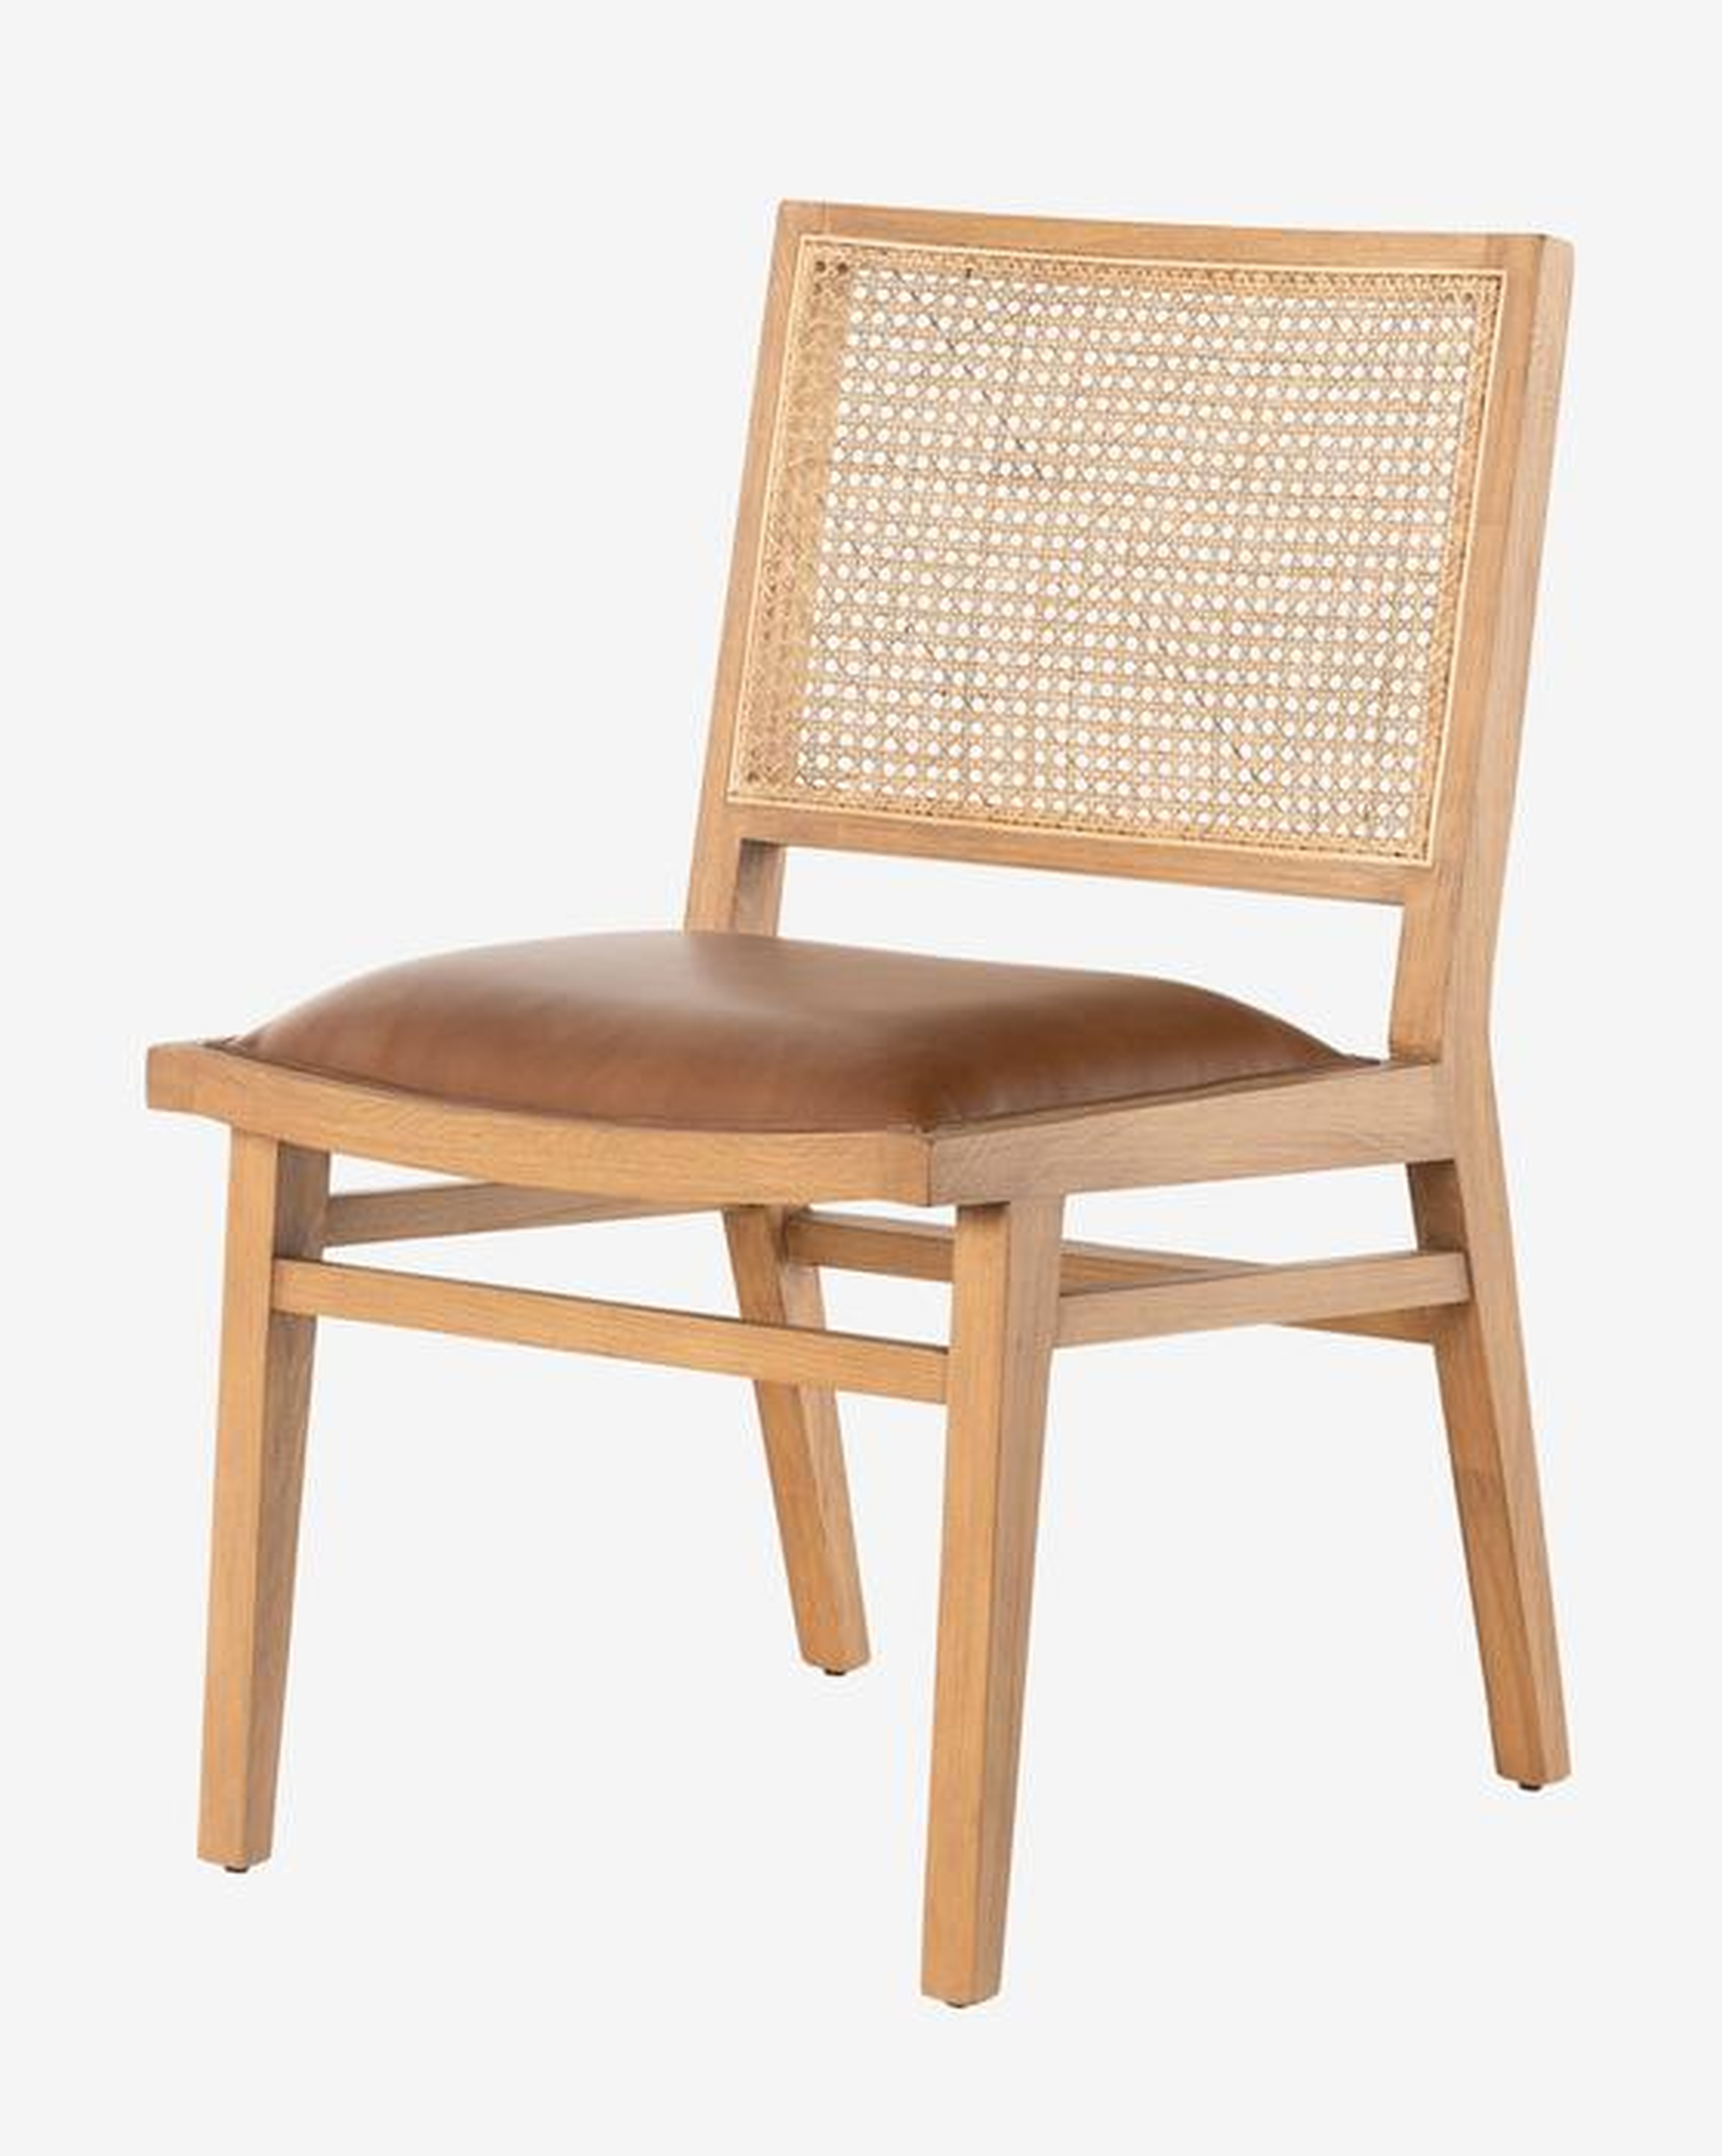 Jett Dining Chair - McGee & Co.